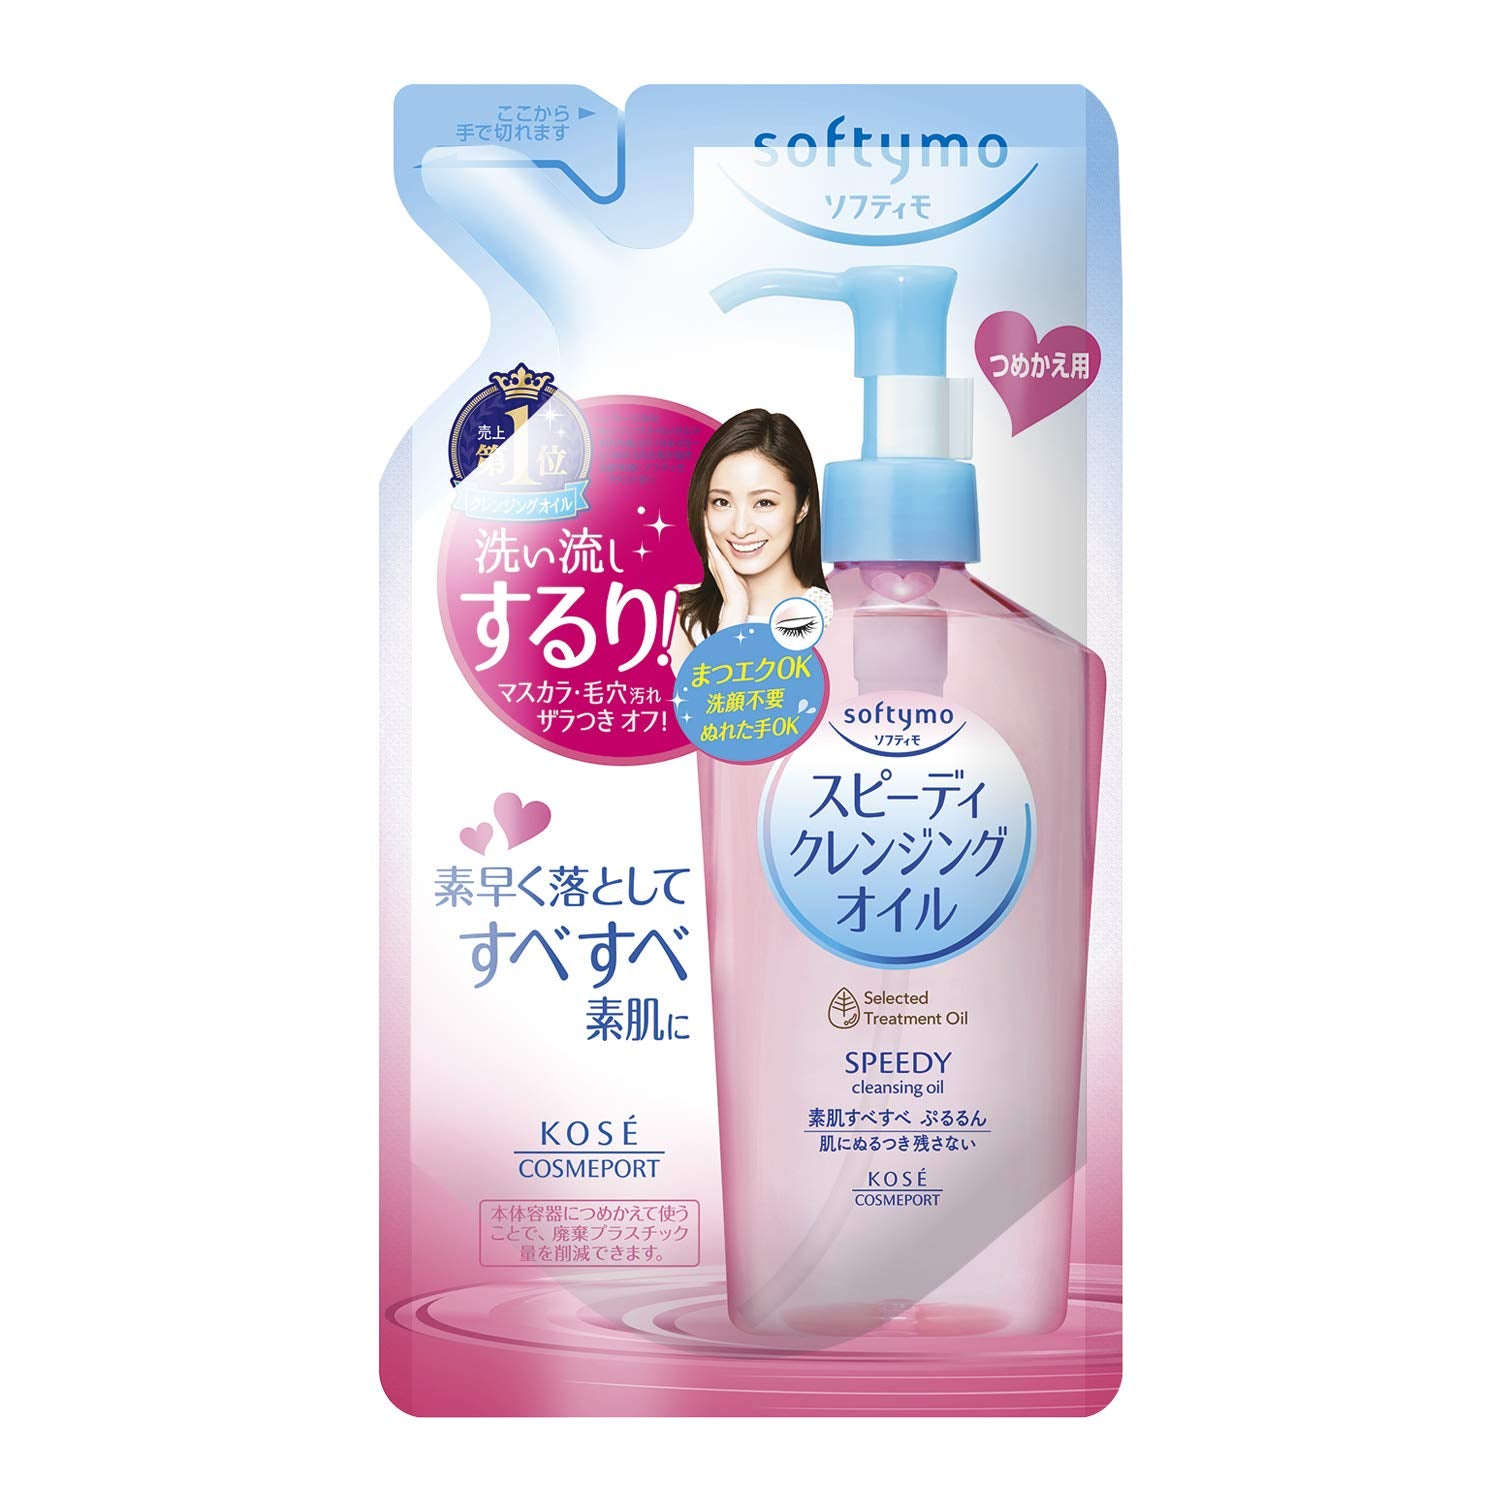 Kose - Softymo Cleansing Oil - 3 Types